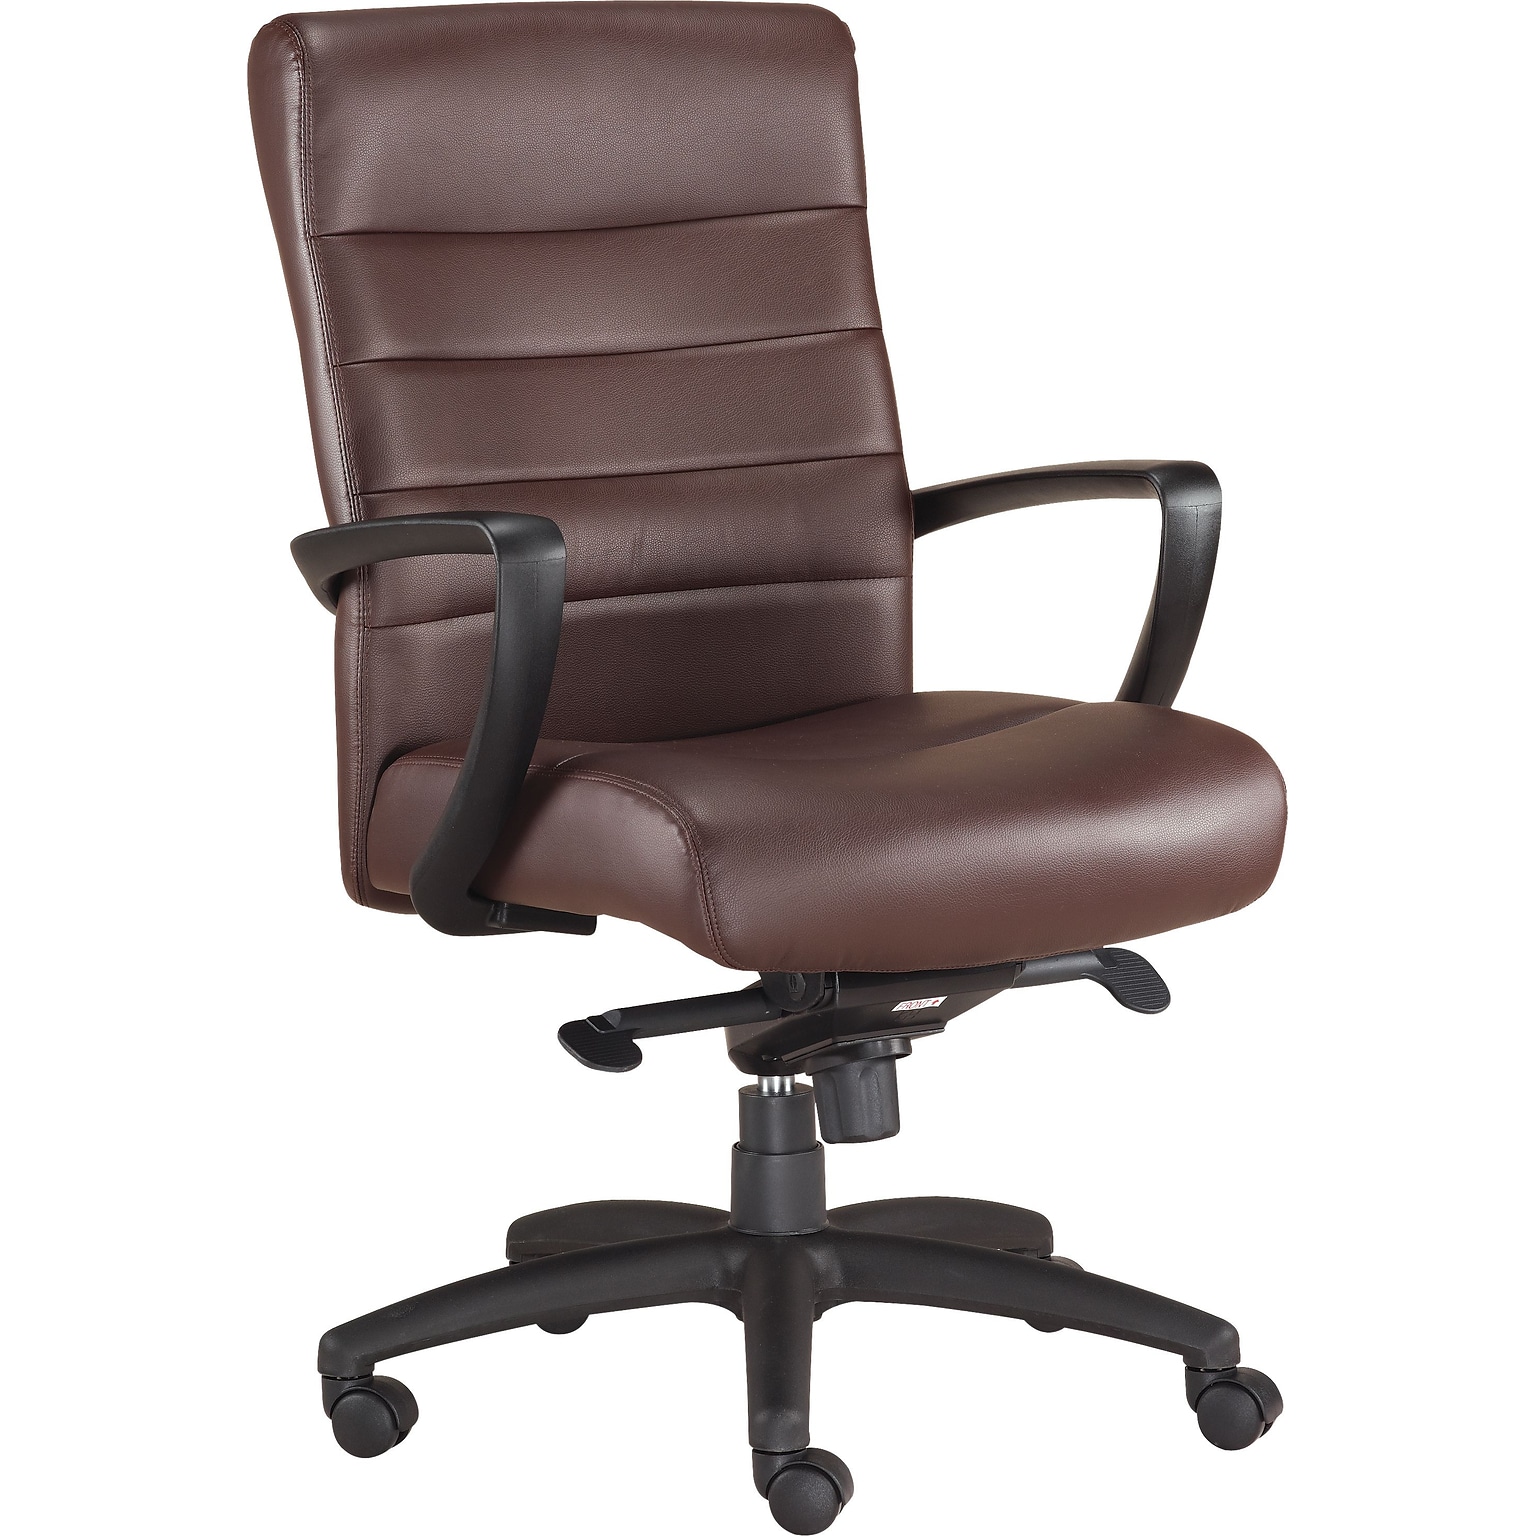 Raynor Manchester Mid-Back Executive Chair, Leather, Brown, Seat: 20W x 20D, Back: 23 1/2W x 19 1/2 - 22H